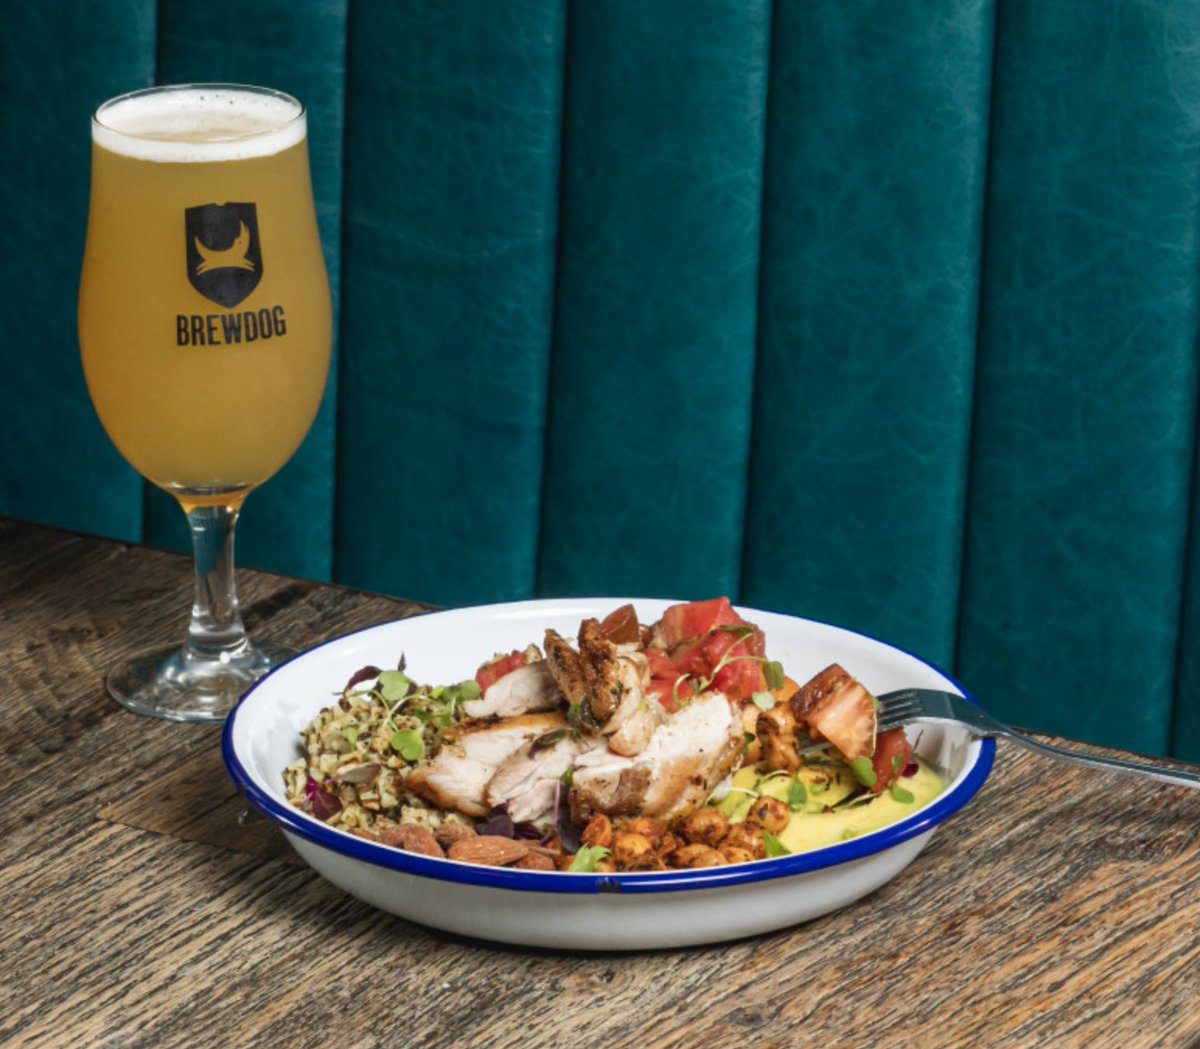 Tired of boring Salads for your Healthy Eating New Years Resolution?😴 Why not come on down and try our awesome Salad Bowls!😍 Modelling here for us we have the Protein Power!😎💪 #brewdogbradford #bradfordbar #newyearsresolutions #salad